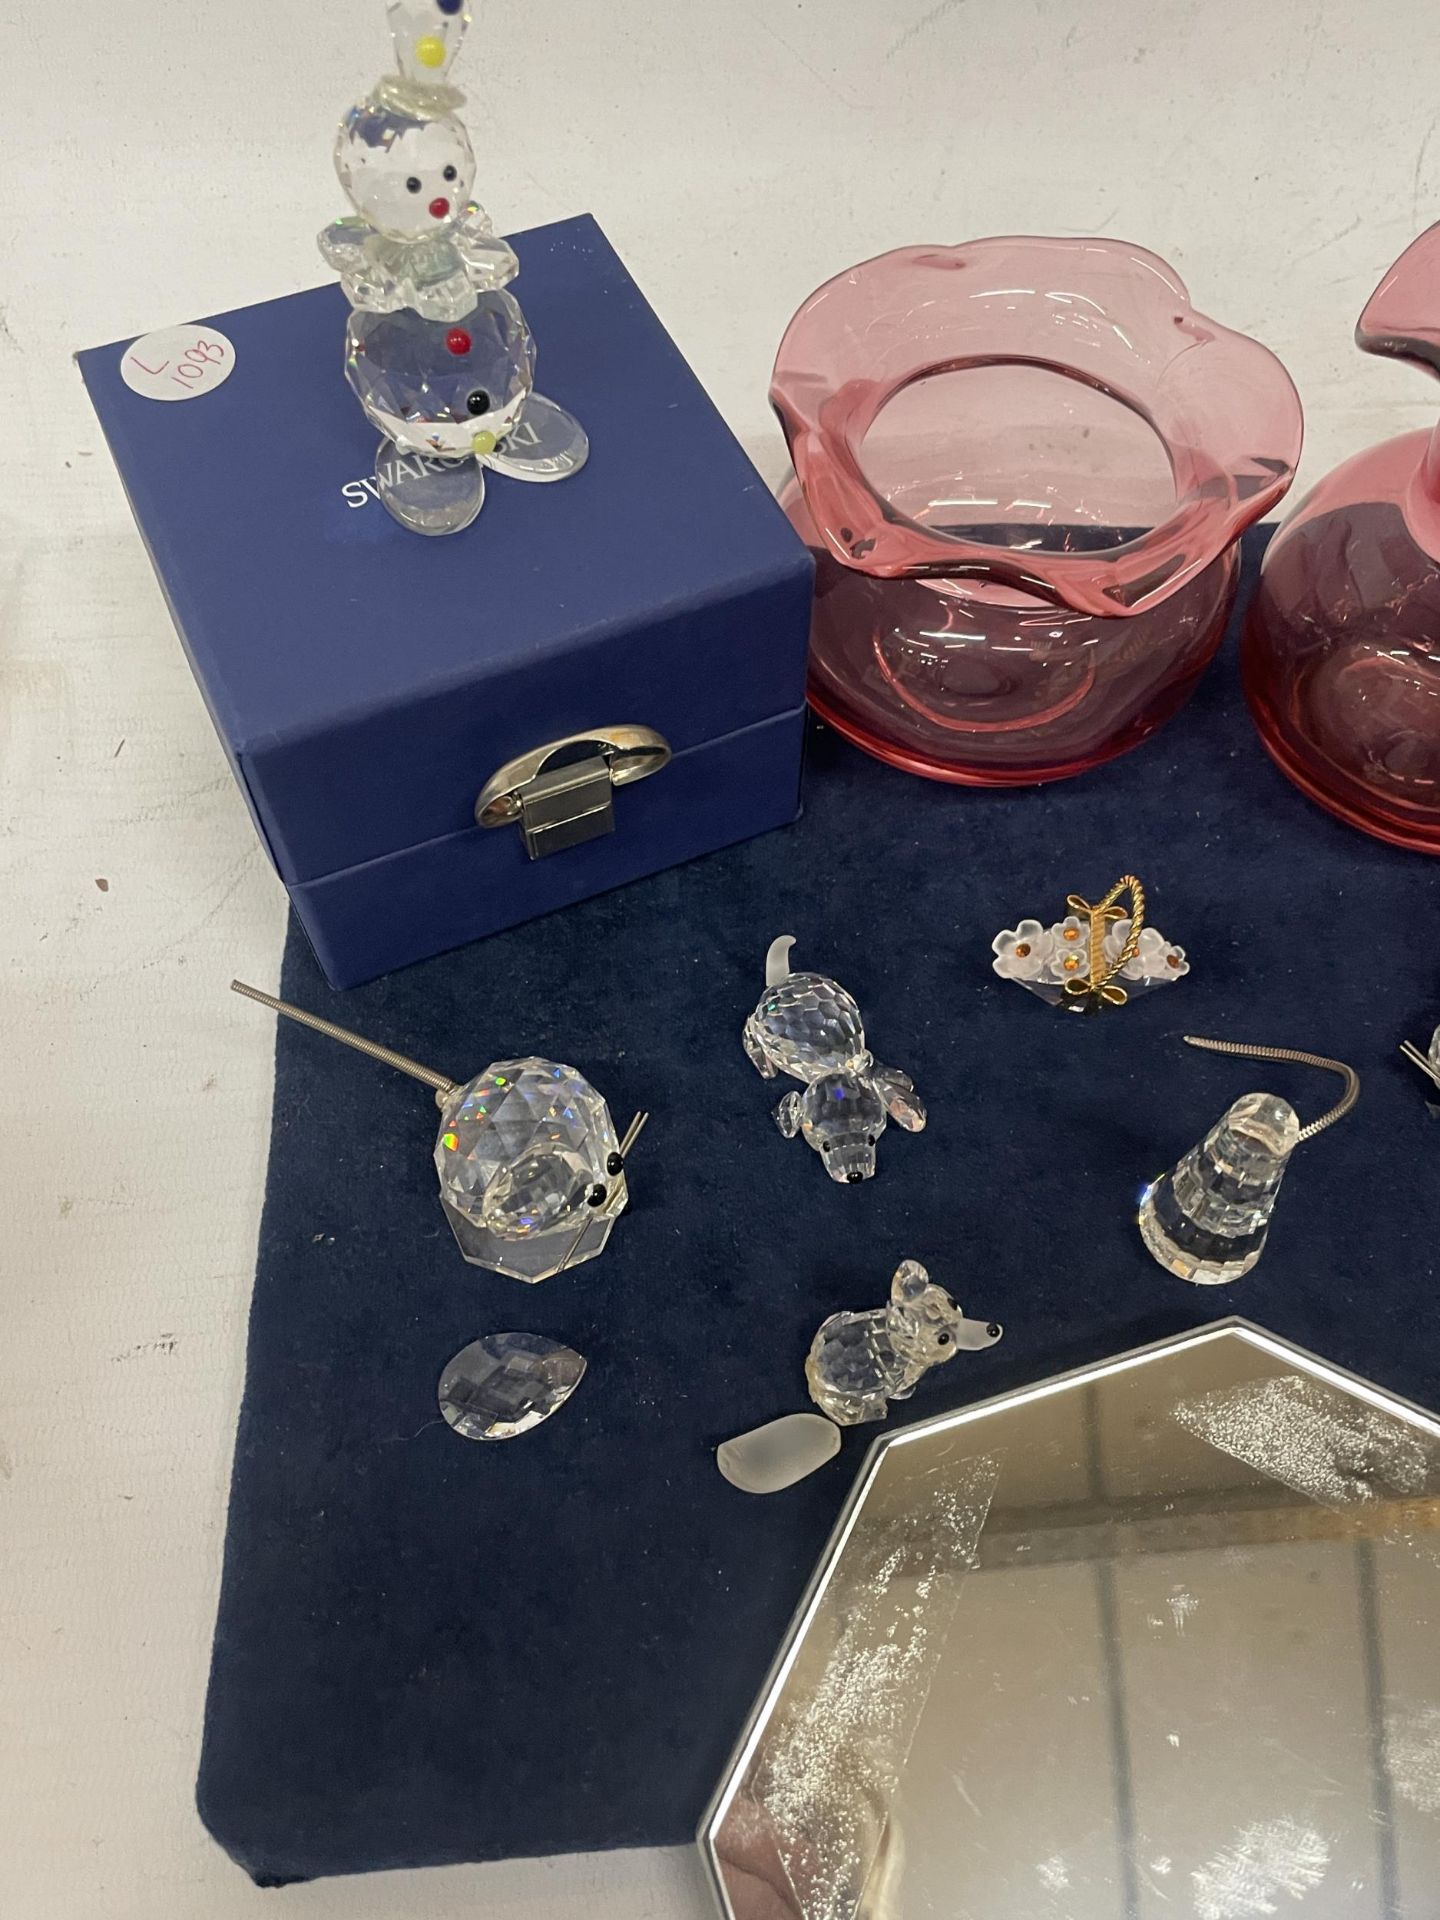 A COLLECTION OF SWAROVSKI CRYSTAL ORNAMENTS, SOME BOXED AND CRANBERRY GLASS ITEMS - Image 2 of 3